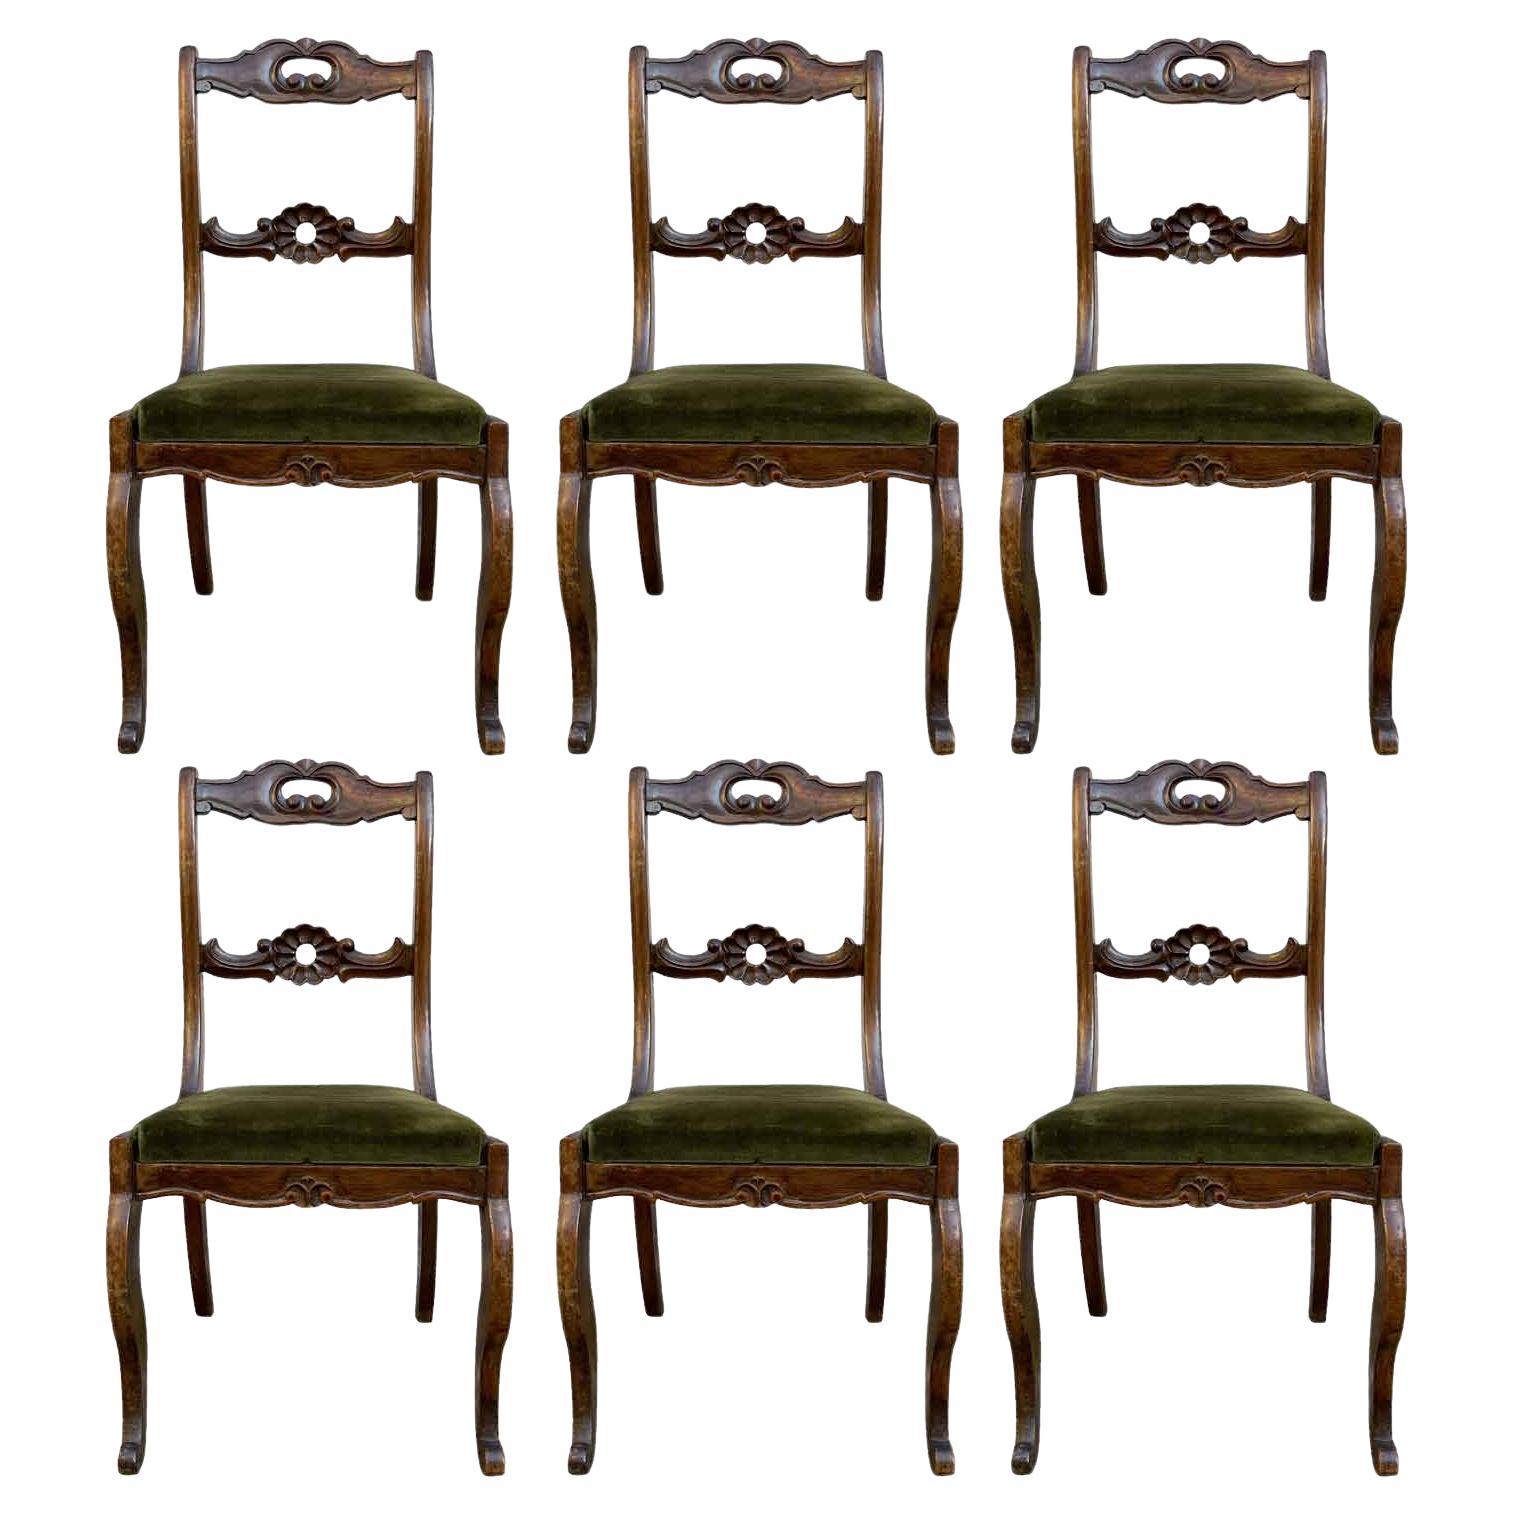 Set of Six Italian Carved Walnut Chairs 19th Century Velvet to Replace